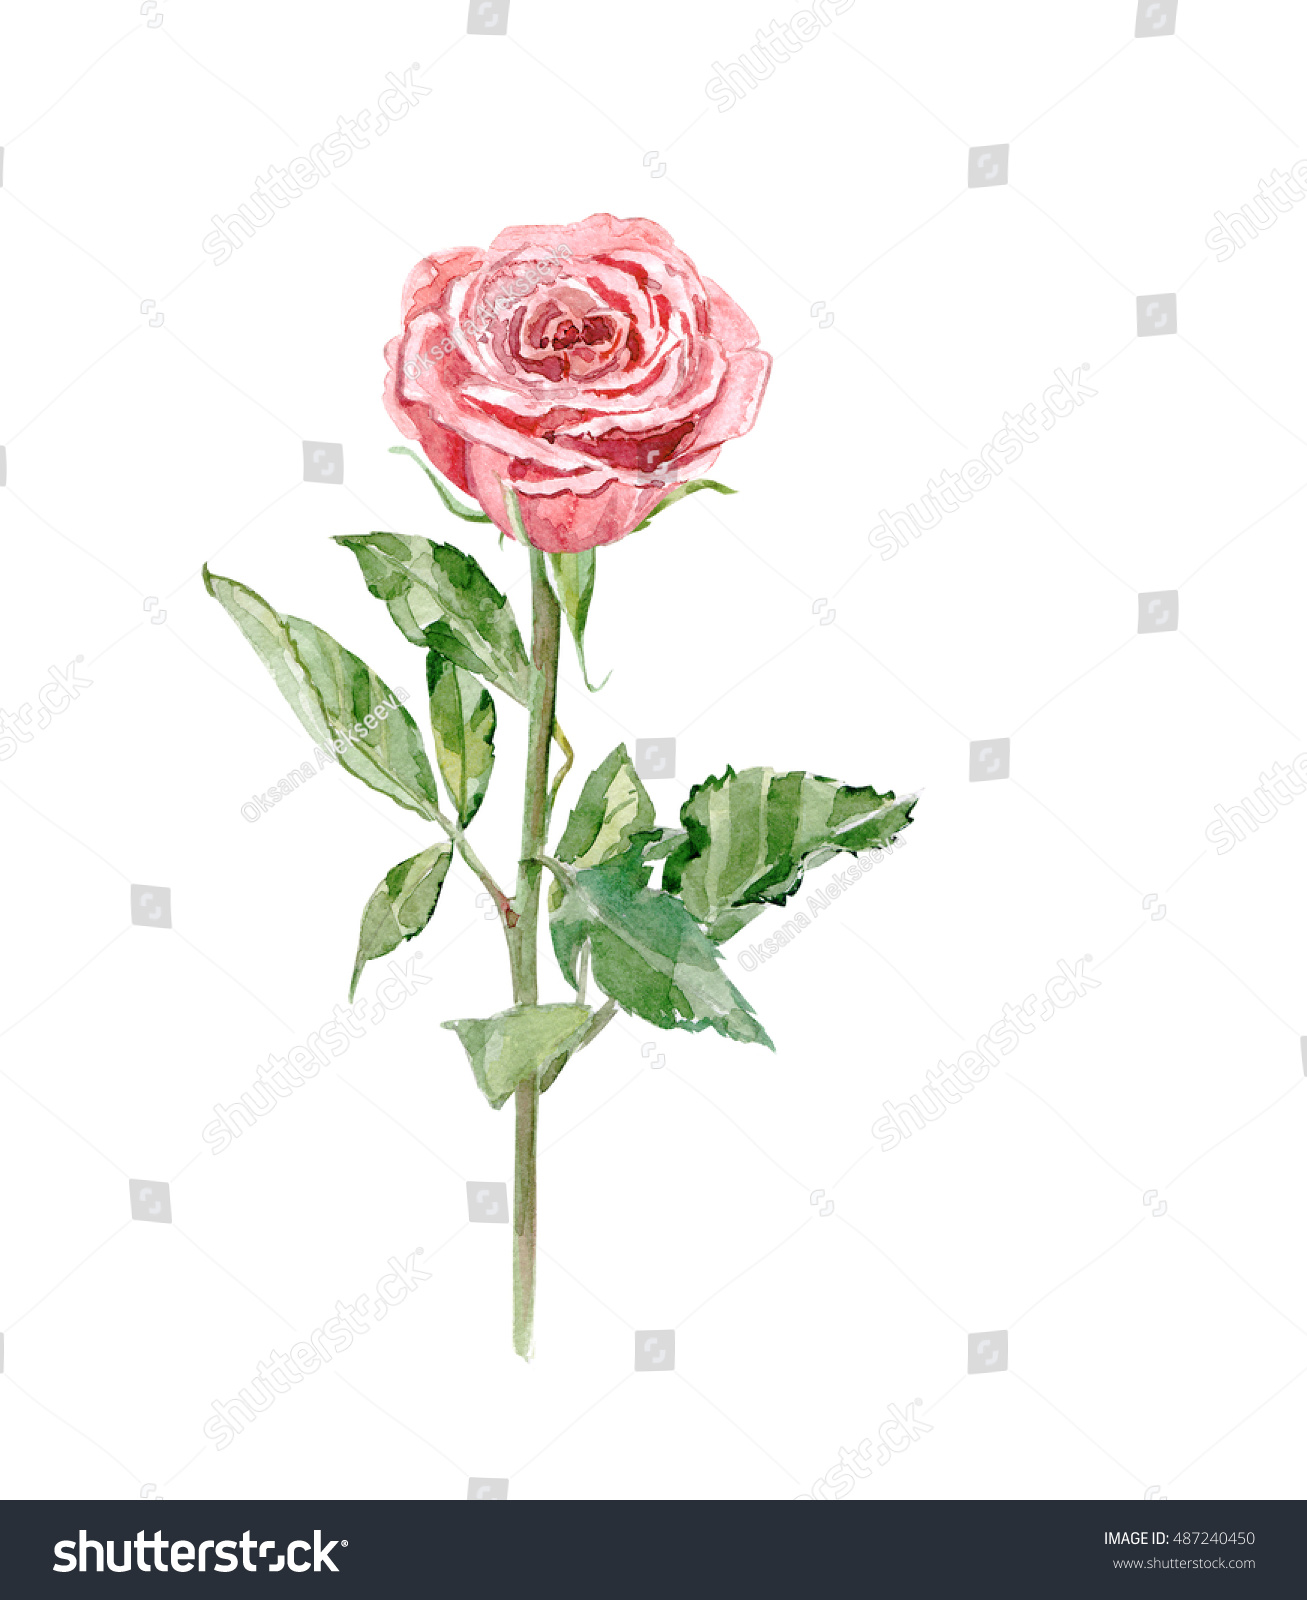 Rose On White Background Watercolor Painting Stock Illustration 487240450